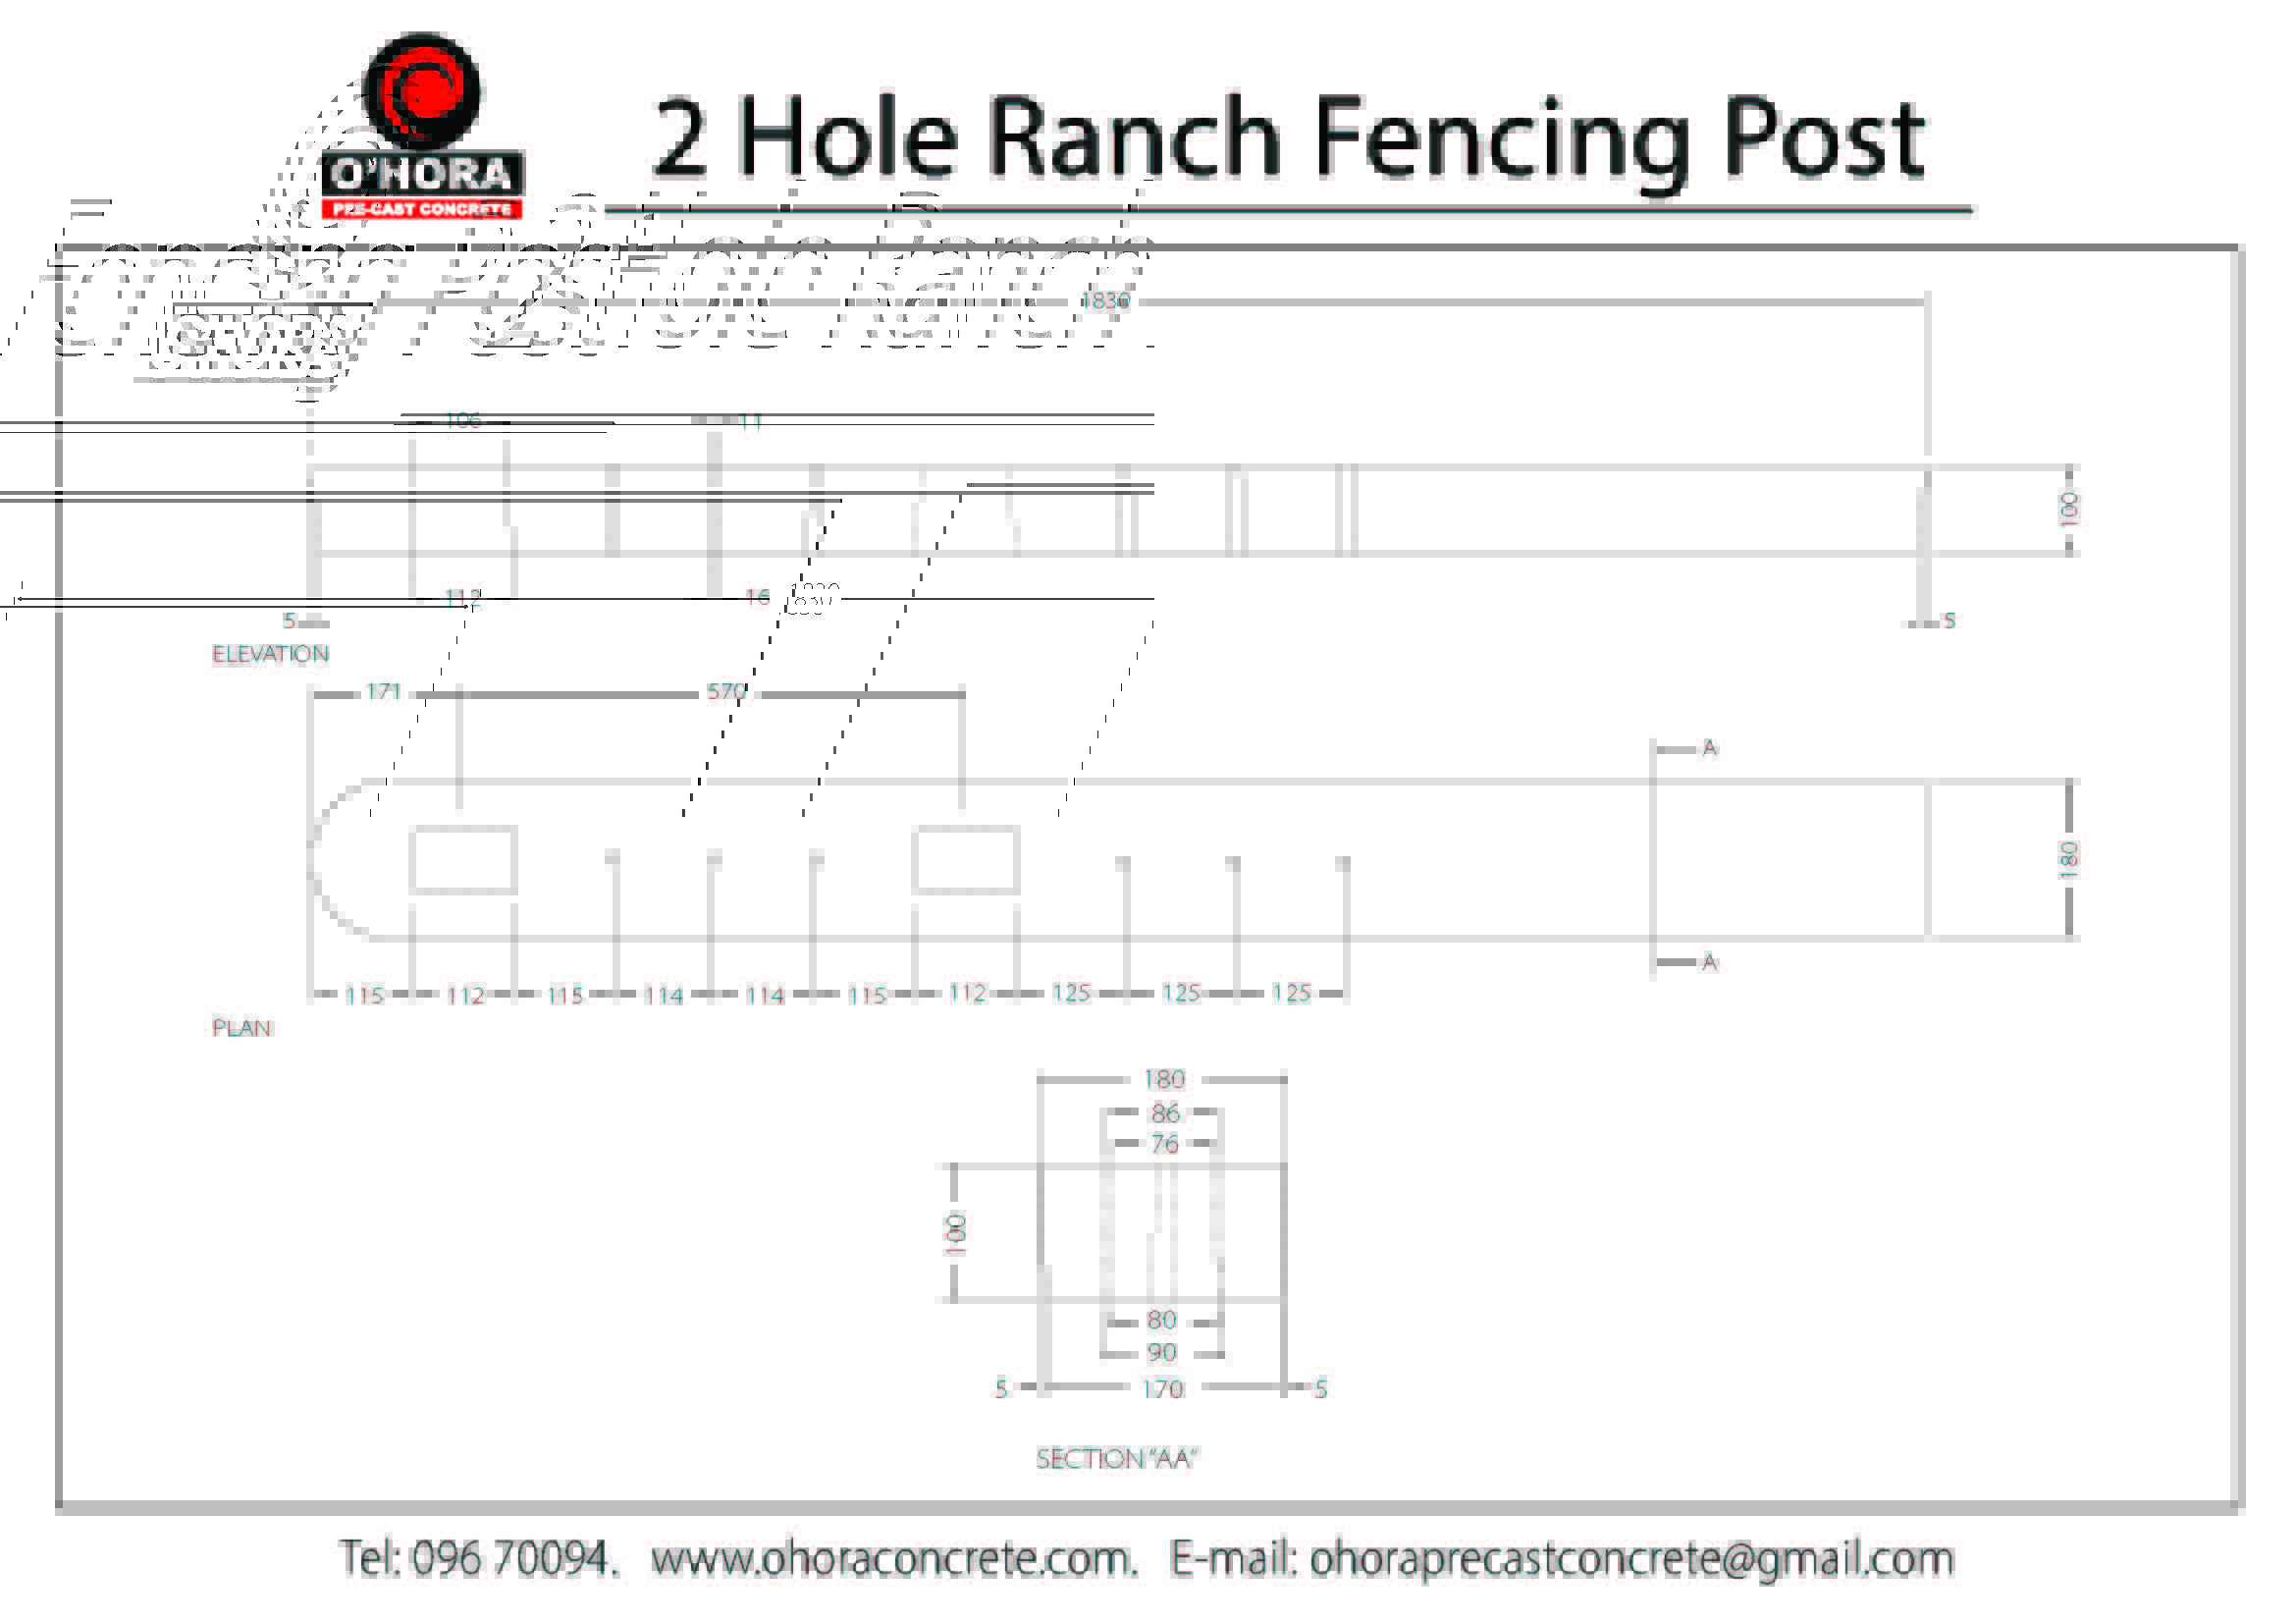 2 Hole Ranch Fencing Post